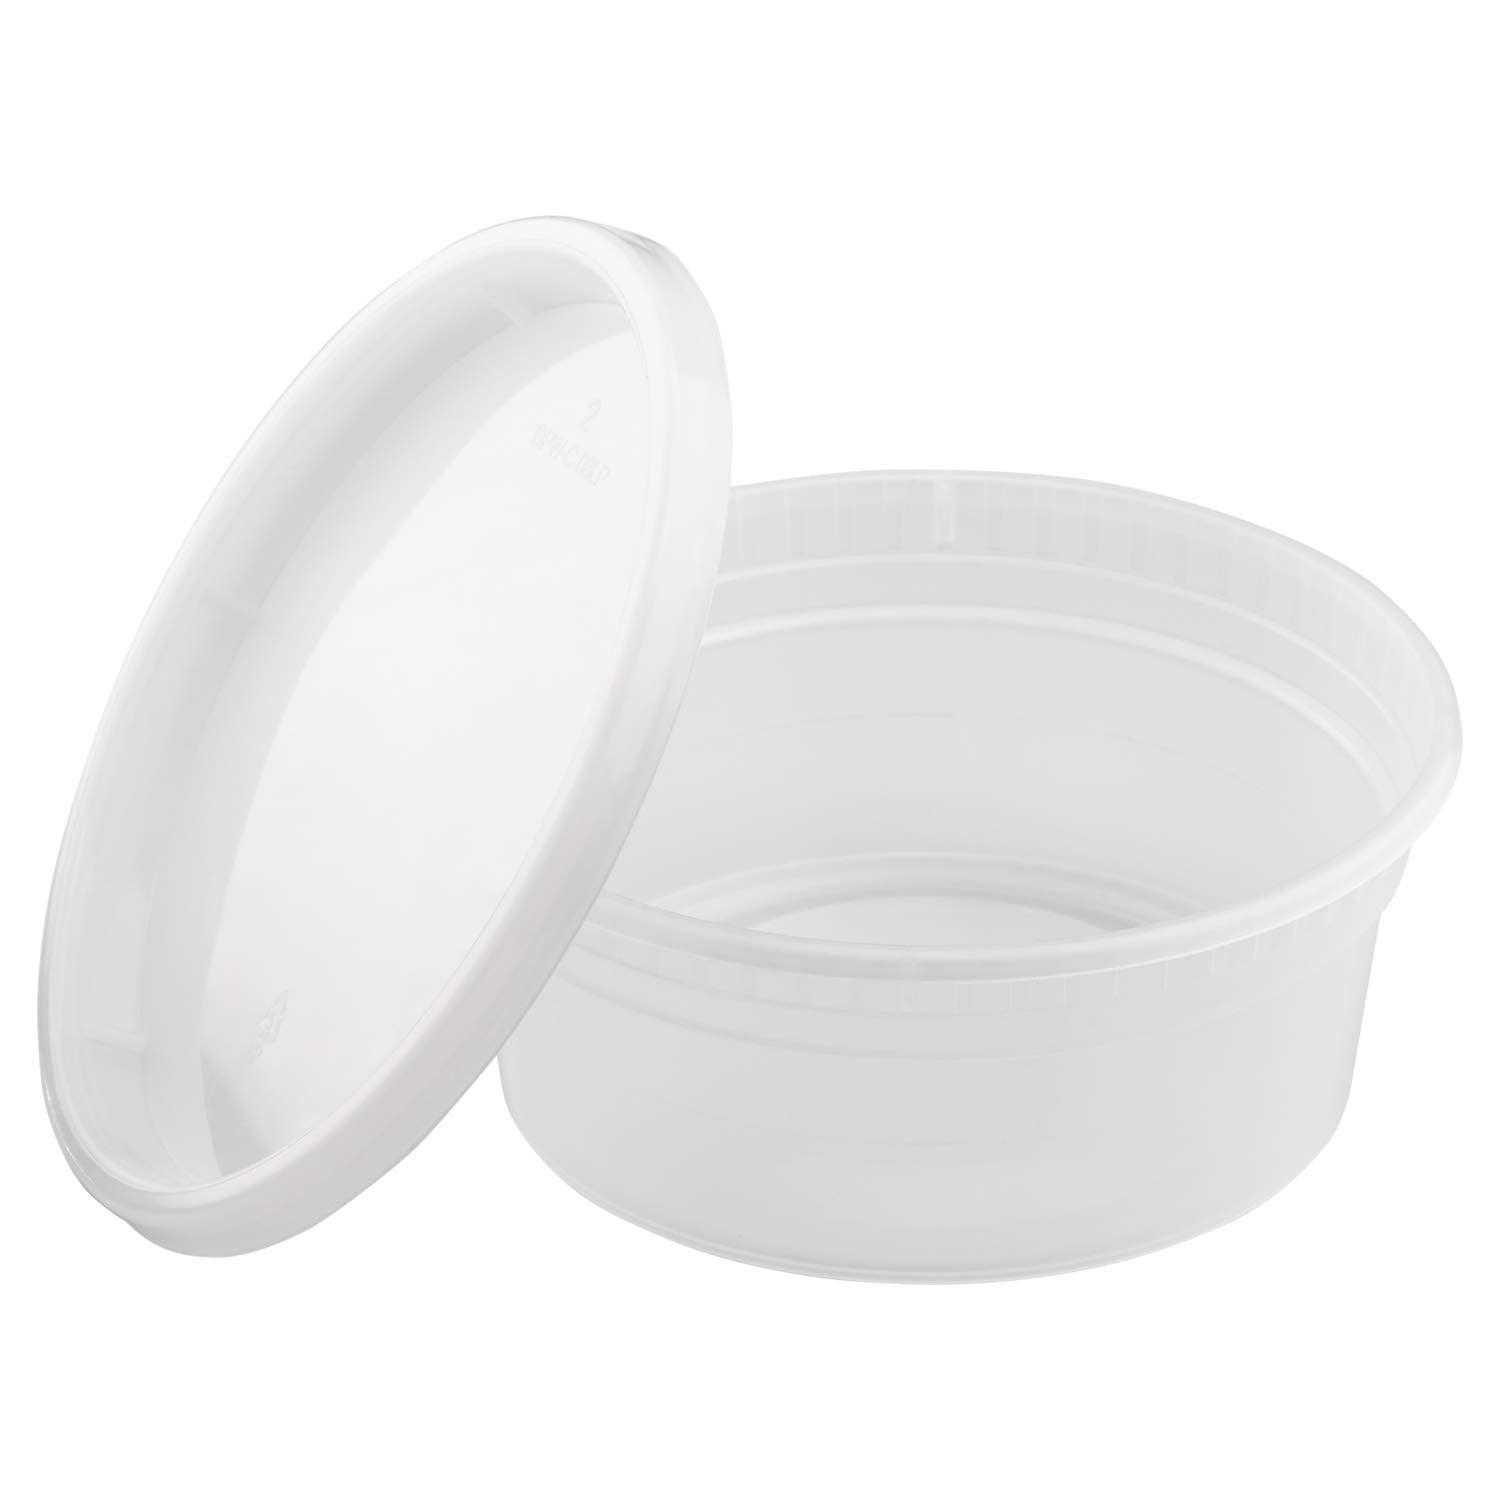 150 Complete 12 oz Deli (Snack) Take-Out & Delivery Containers